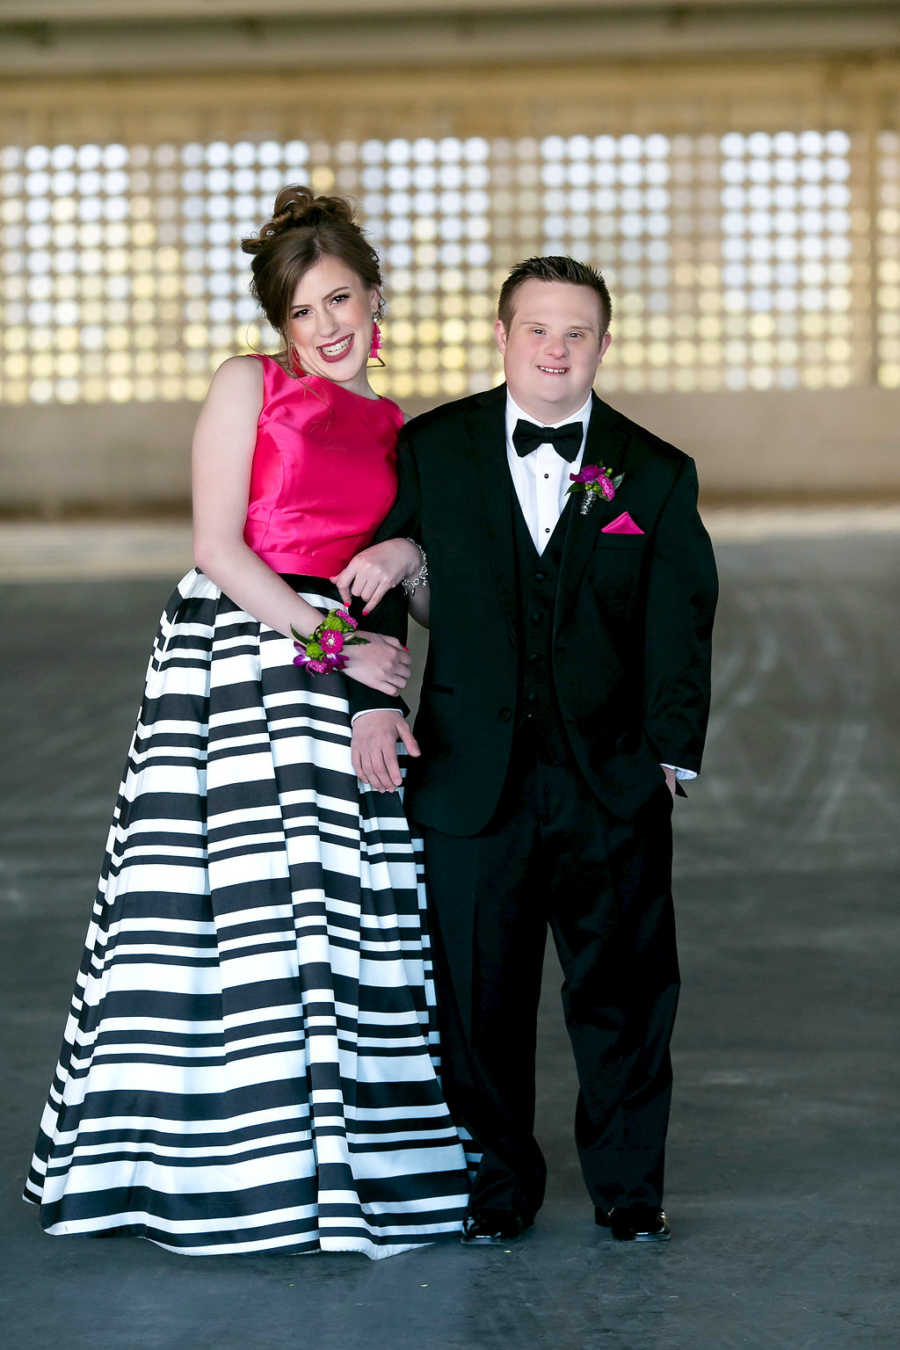 Prom dates with special needs smile with boutonnieres on